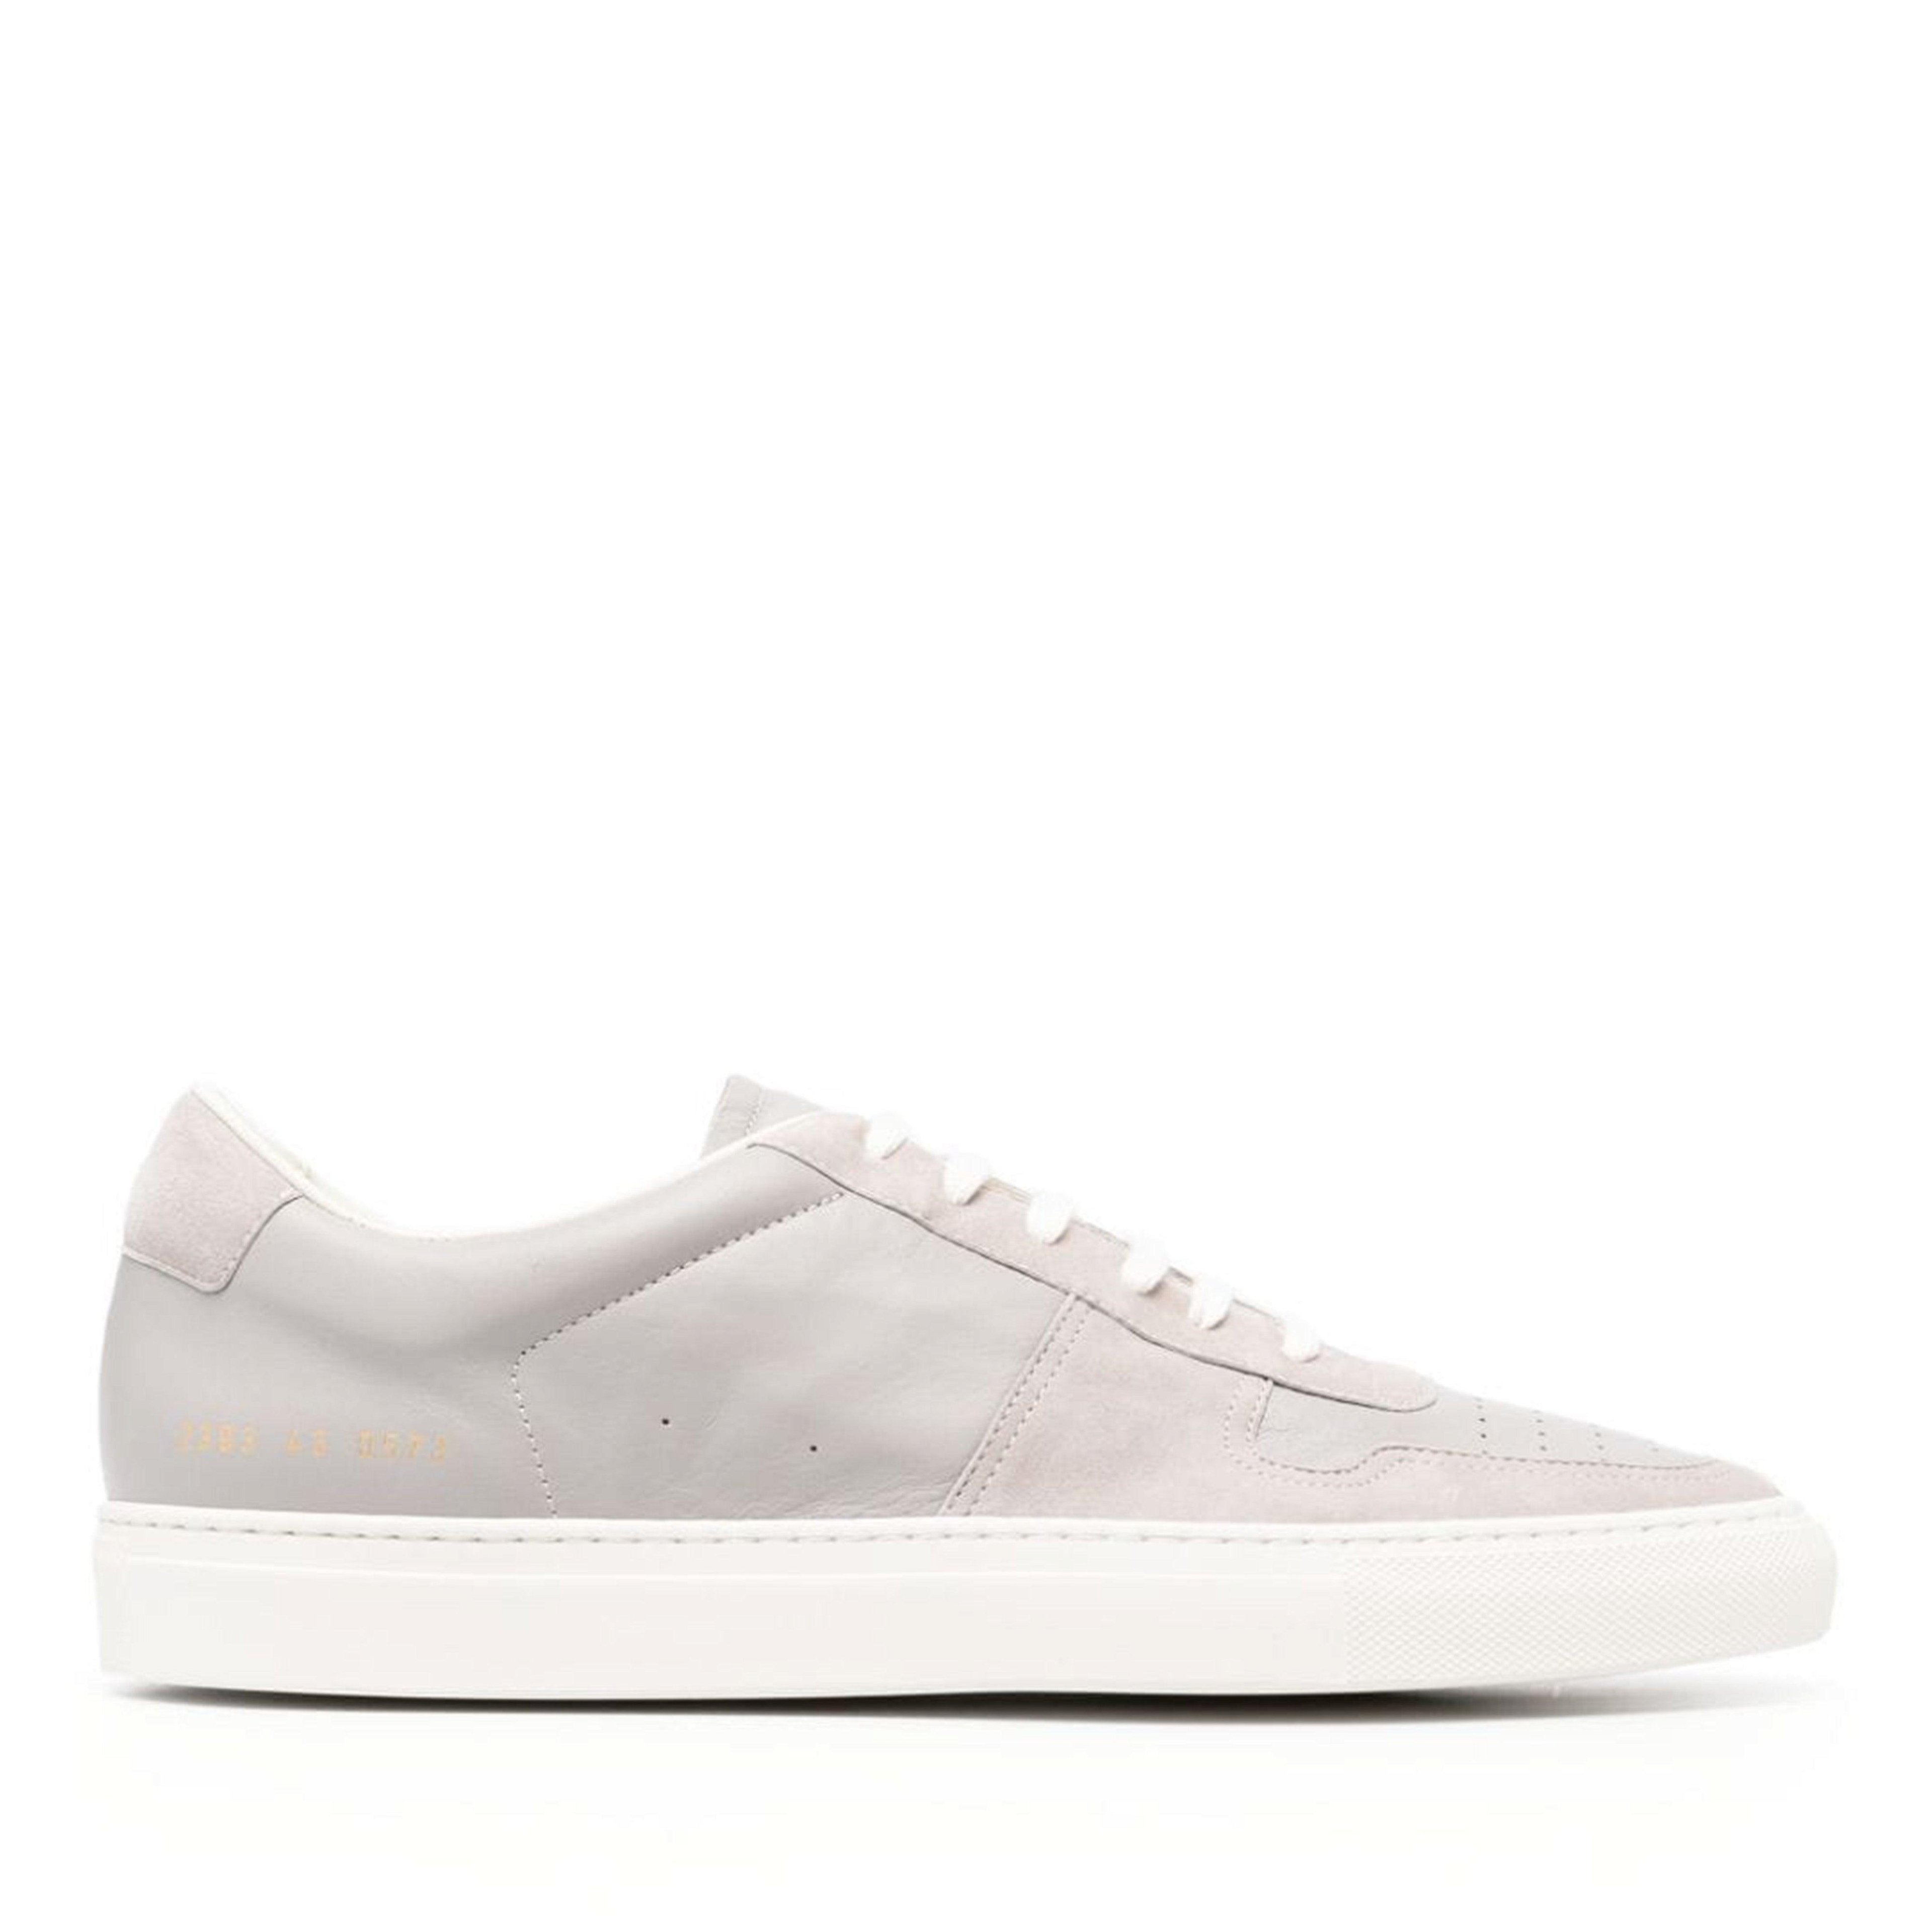 Common Projects - Bball Duo Sneakers - (Charcoal) by COMMON PROJECTS